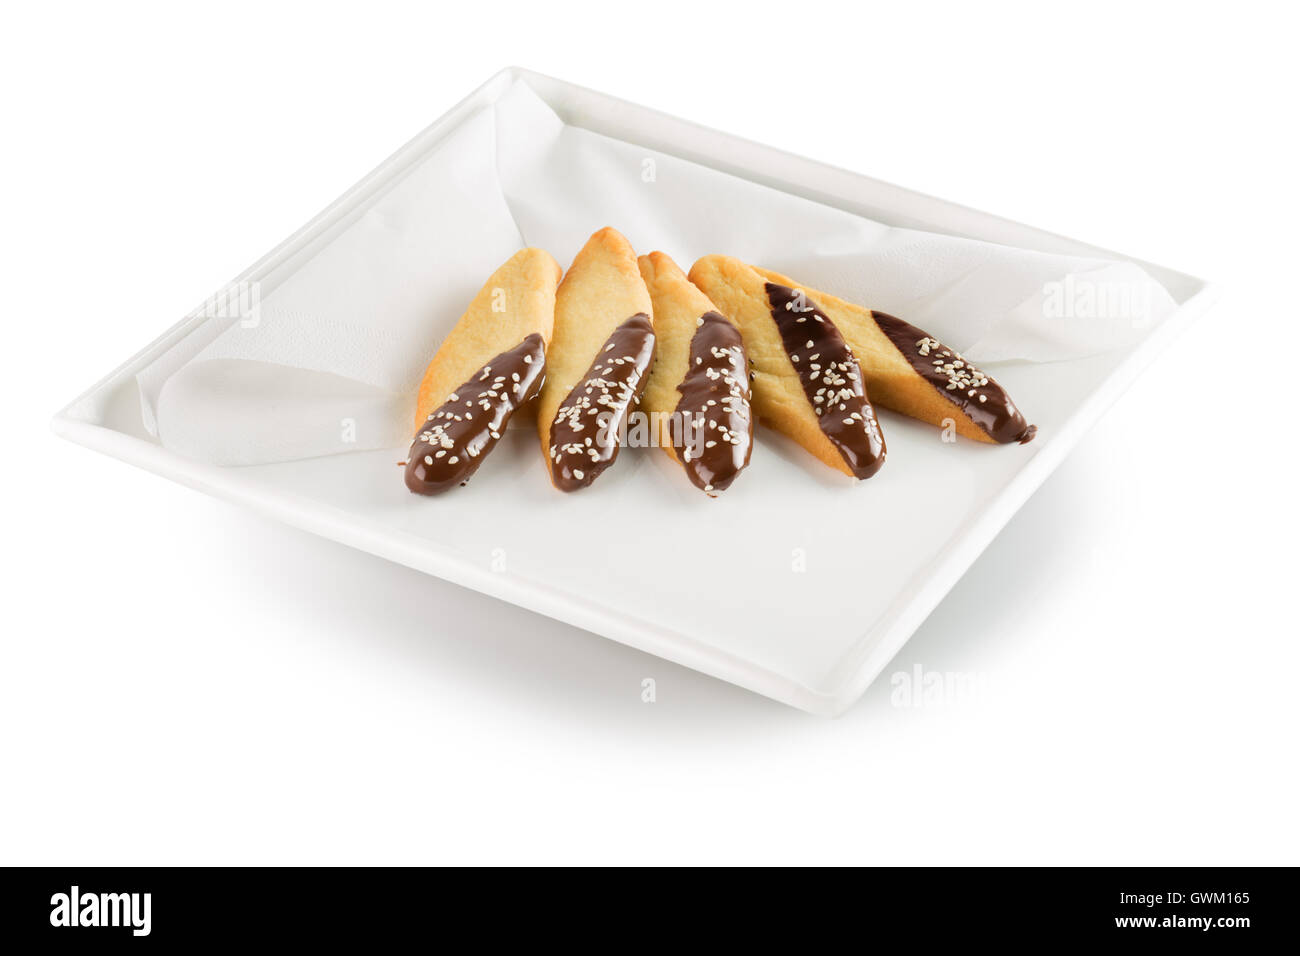 biscuits with chocolate glaze on white plate. Stock Photo